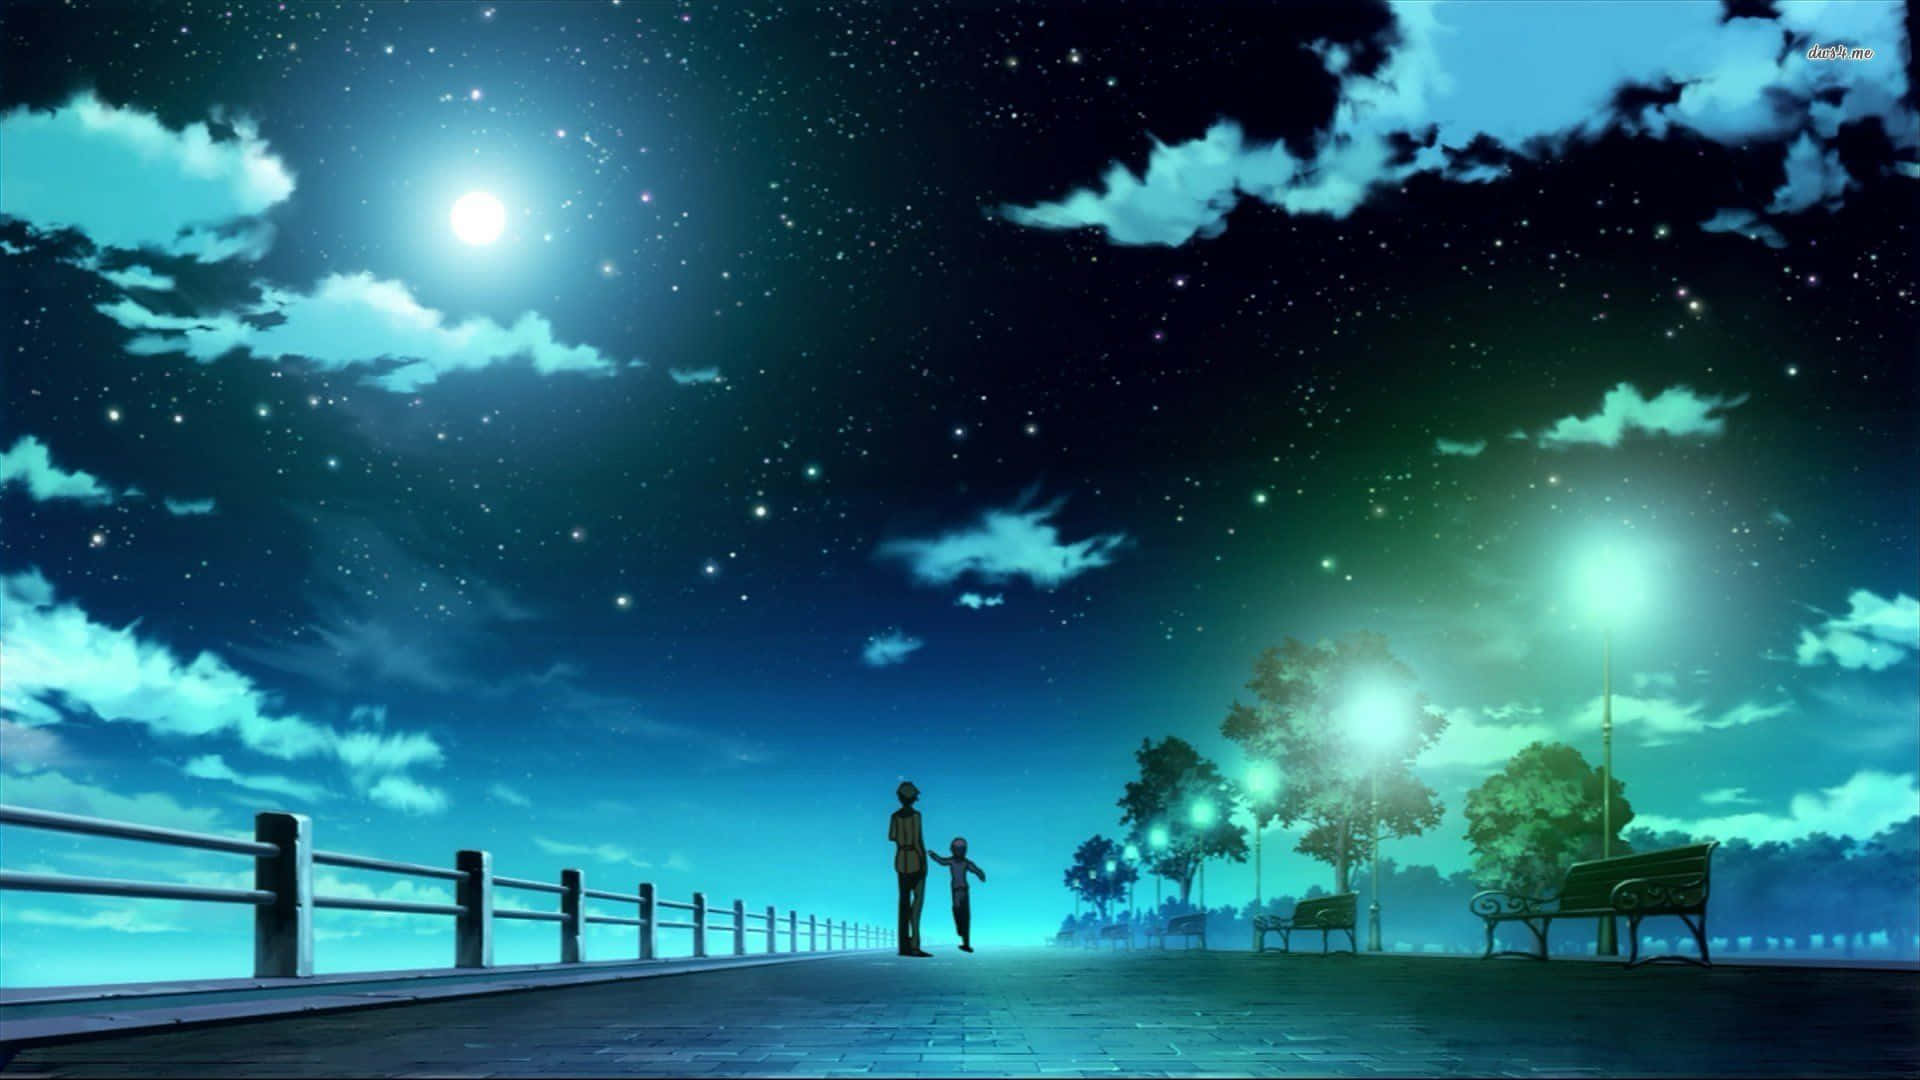 A Serene Chilly Night Under the Stars Wallpaper